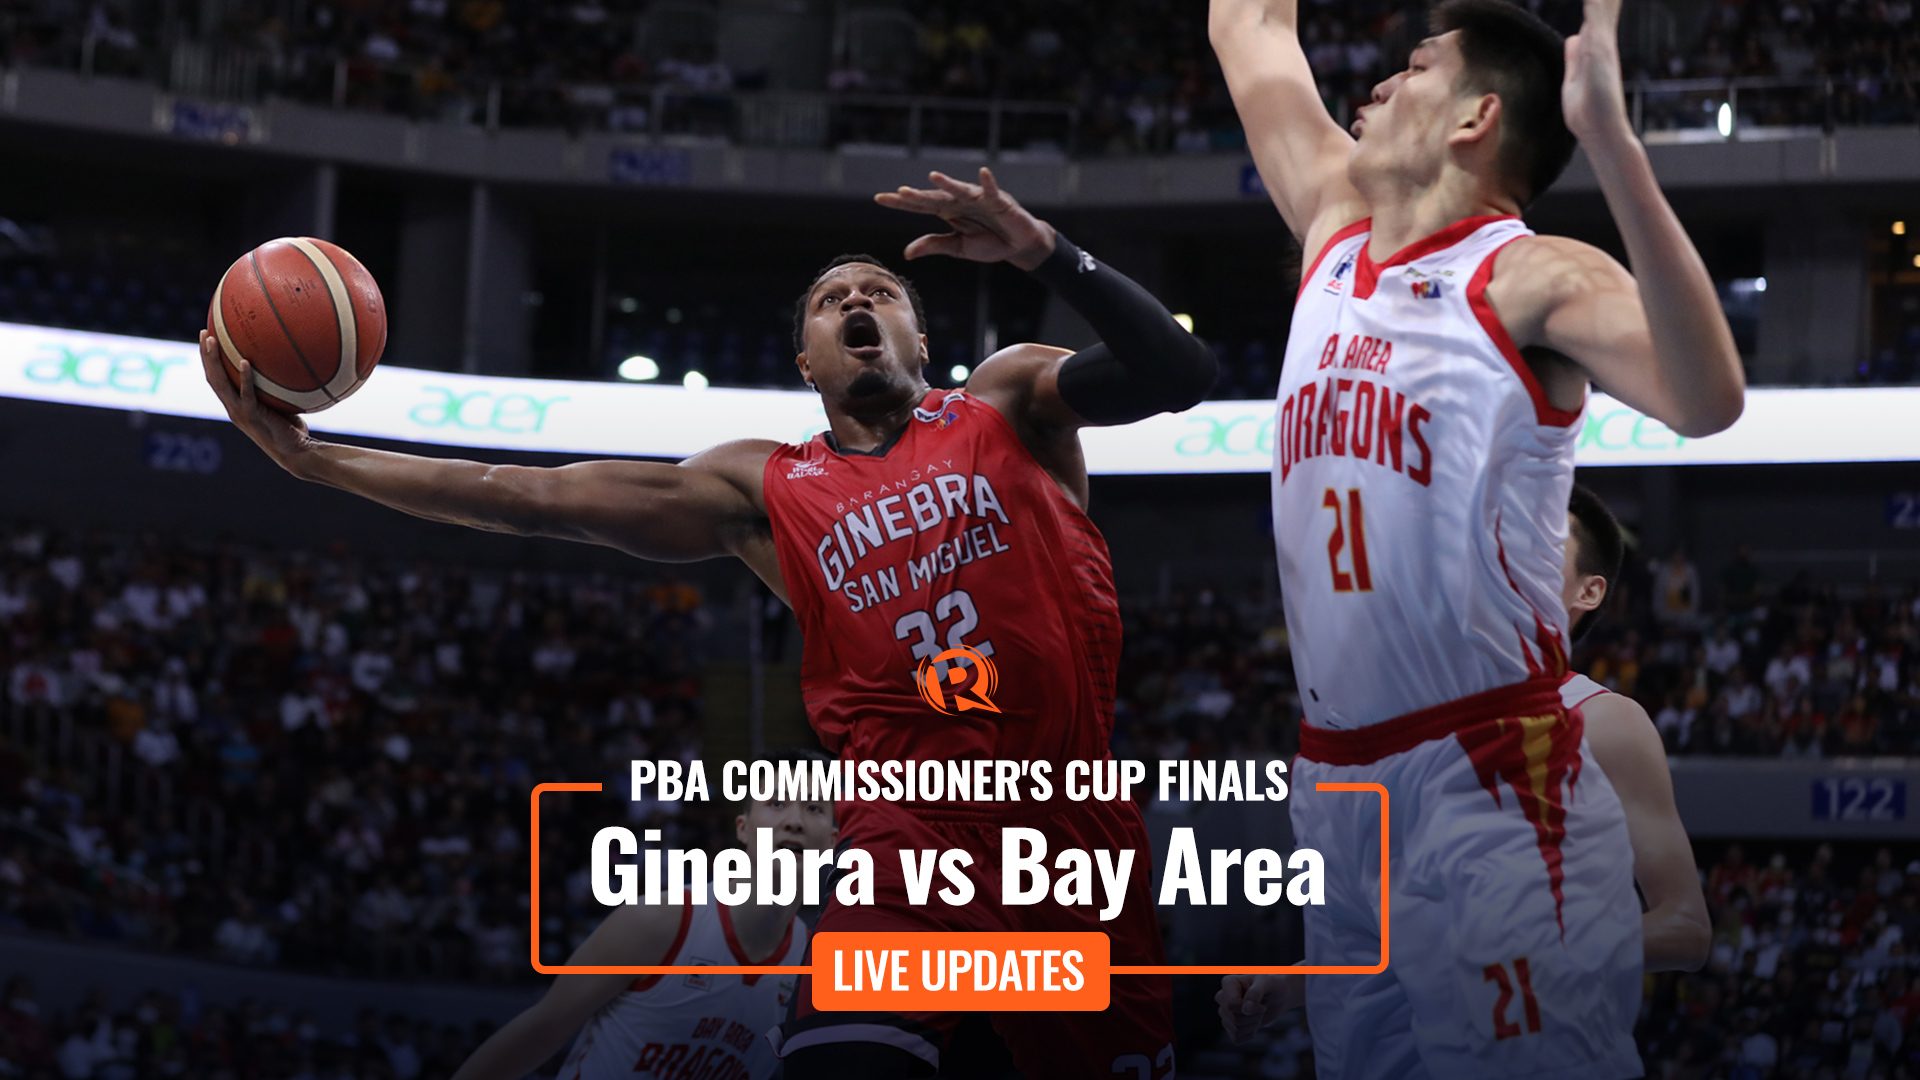 HIGHLIGHTS: Ginebra vs Bay Area, Game 4 – PBA Commissioner’s Cup finals 2022-2023